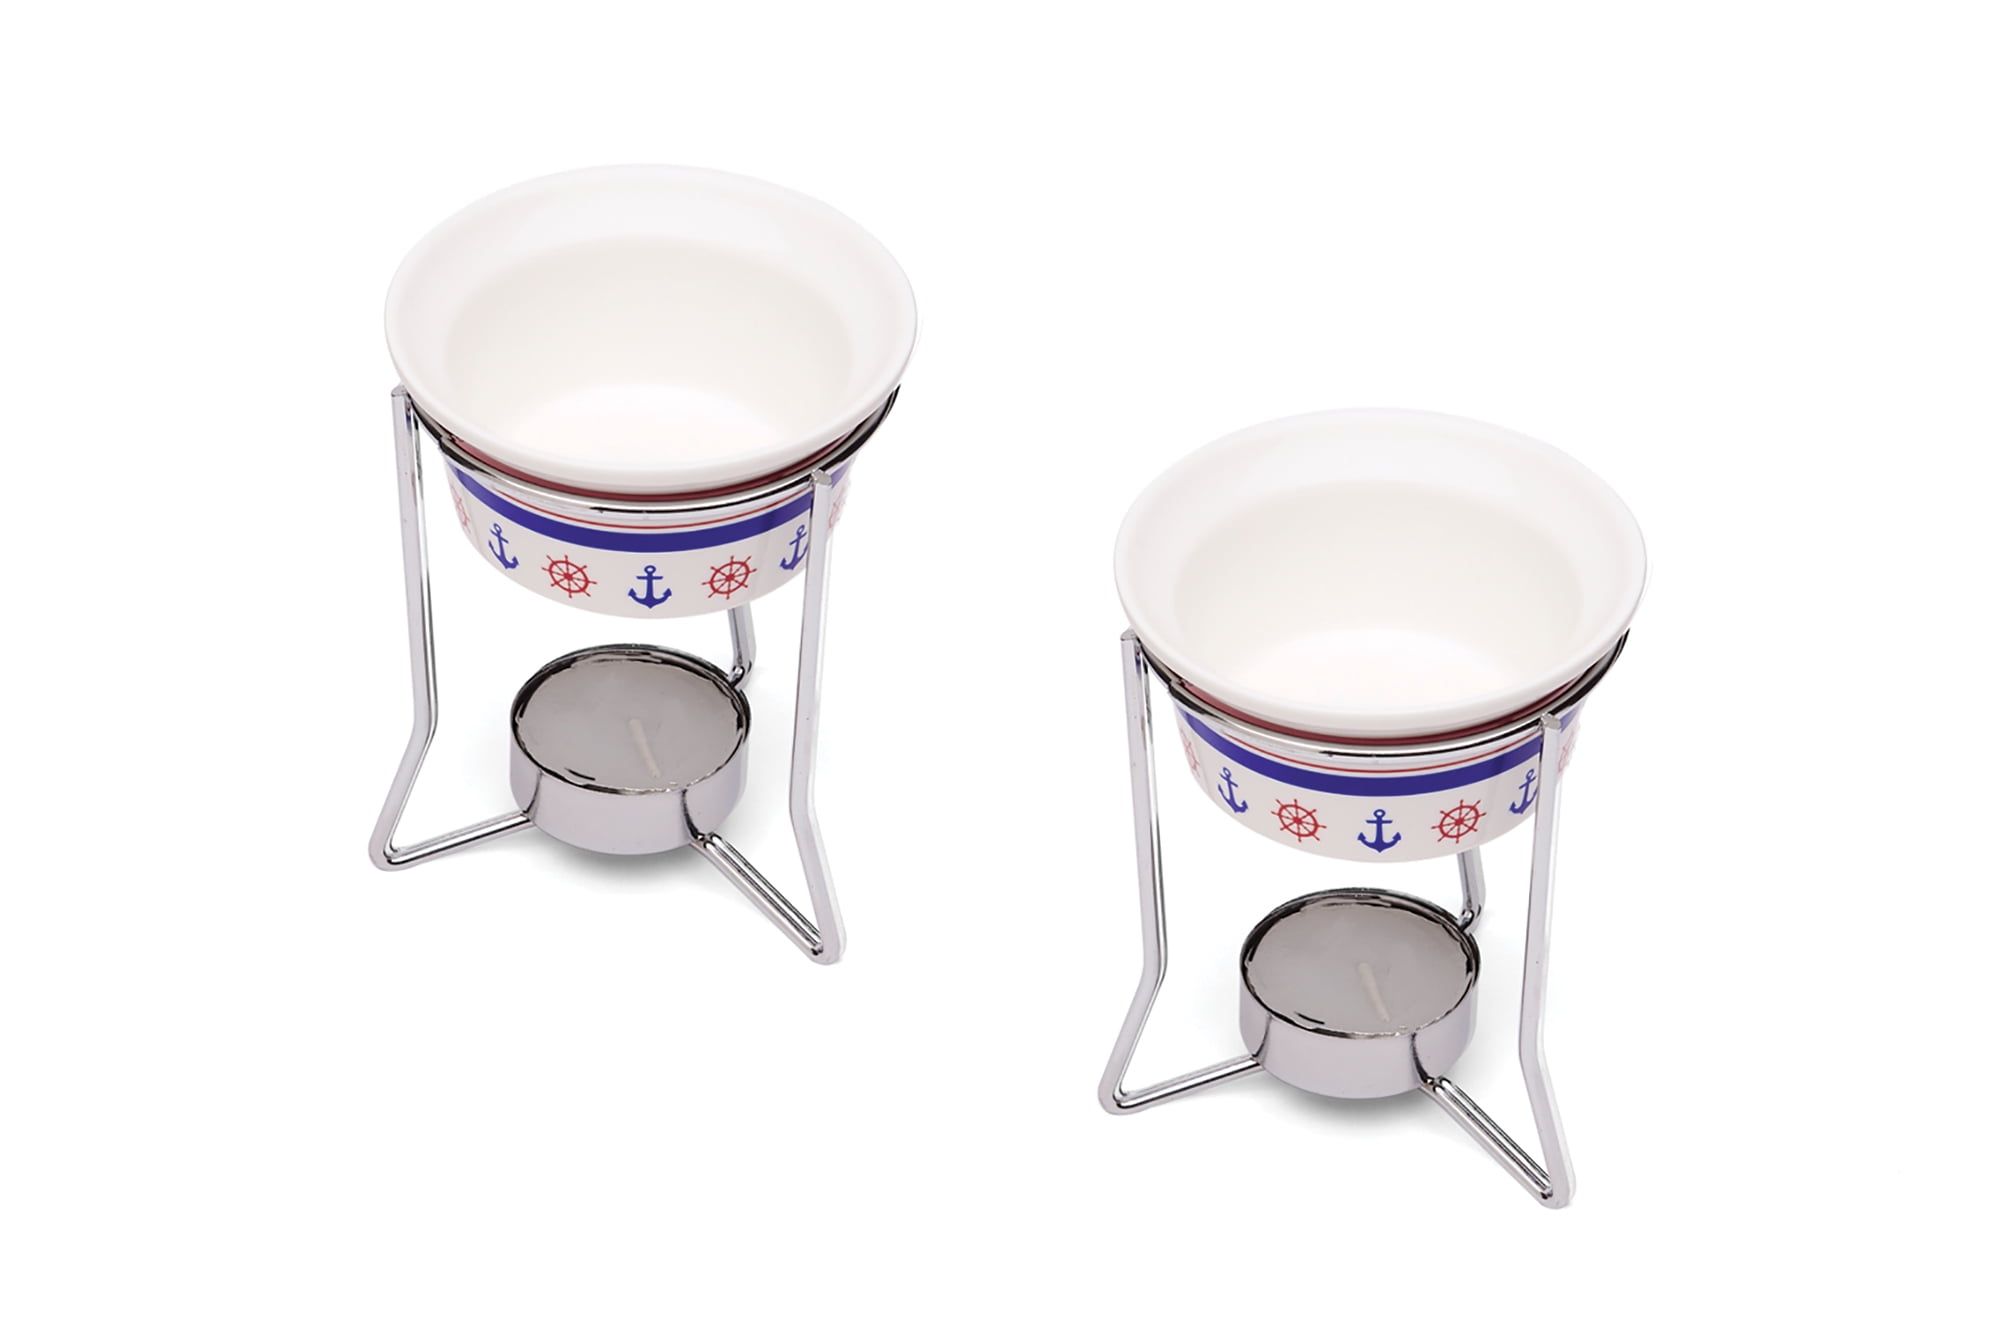 Nantucket Seafood 5590 Butter Warmers Set of 2 